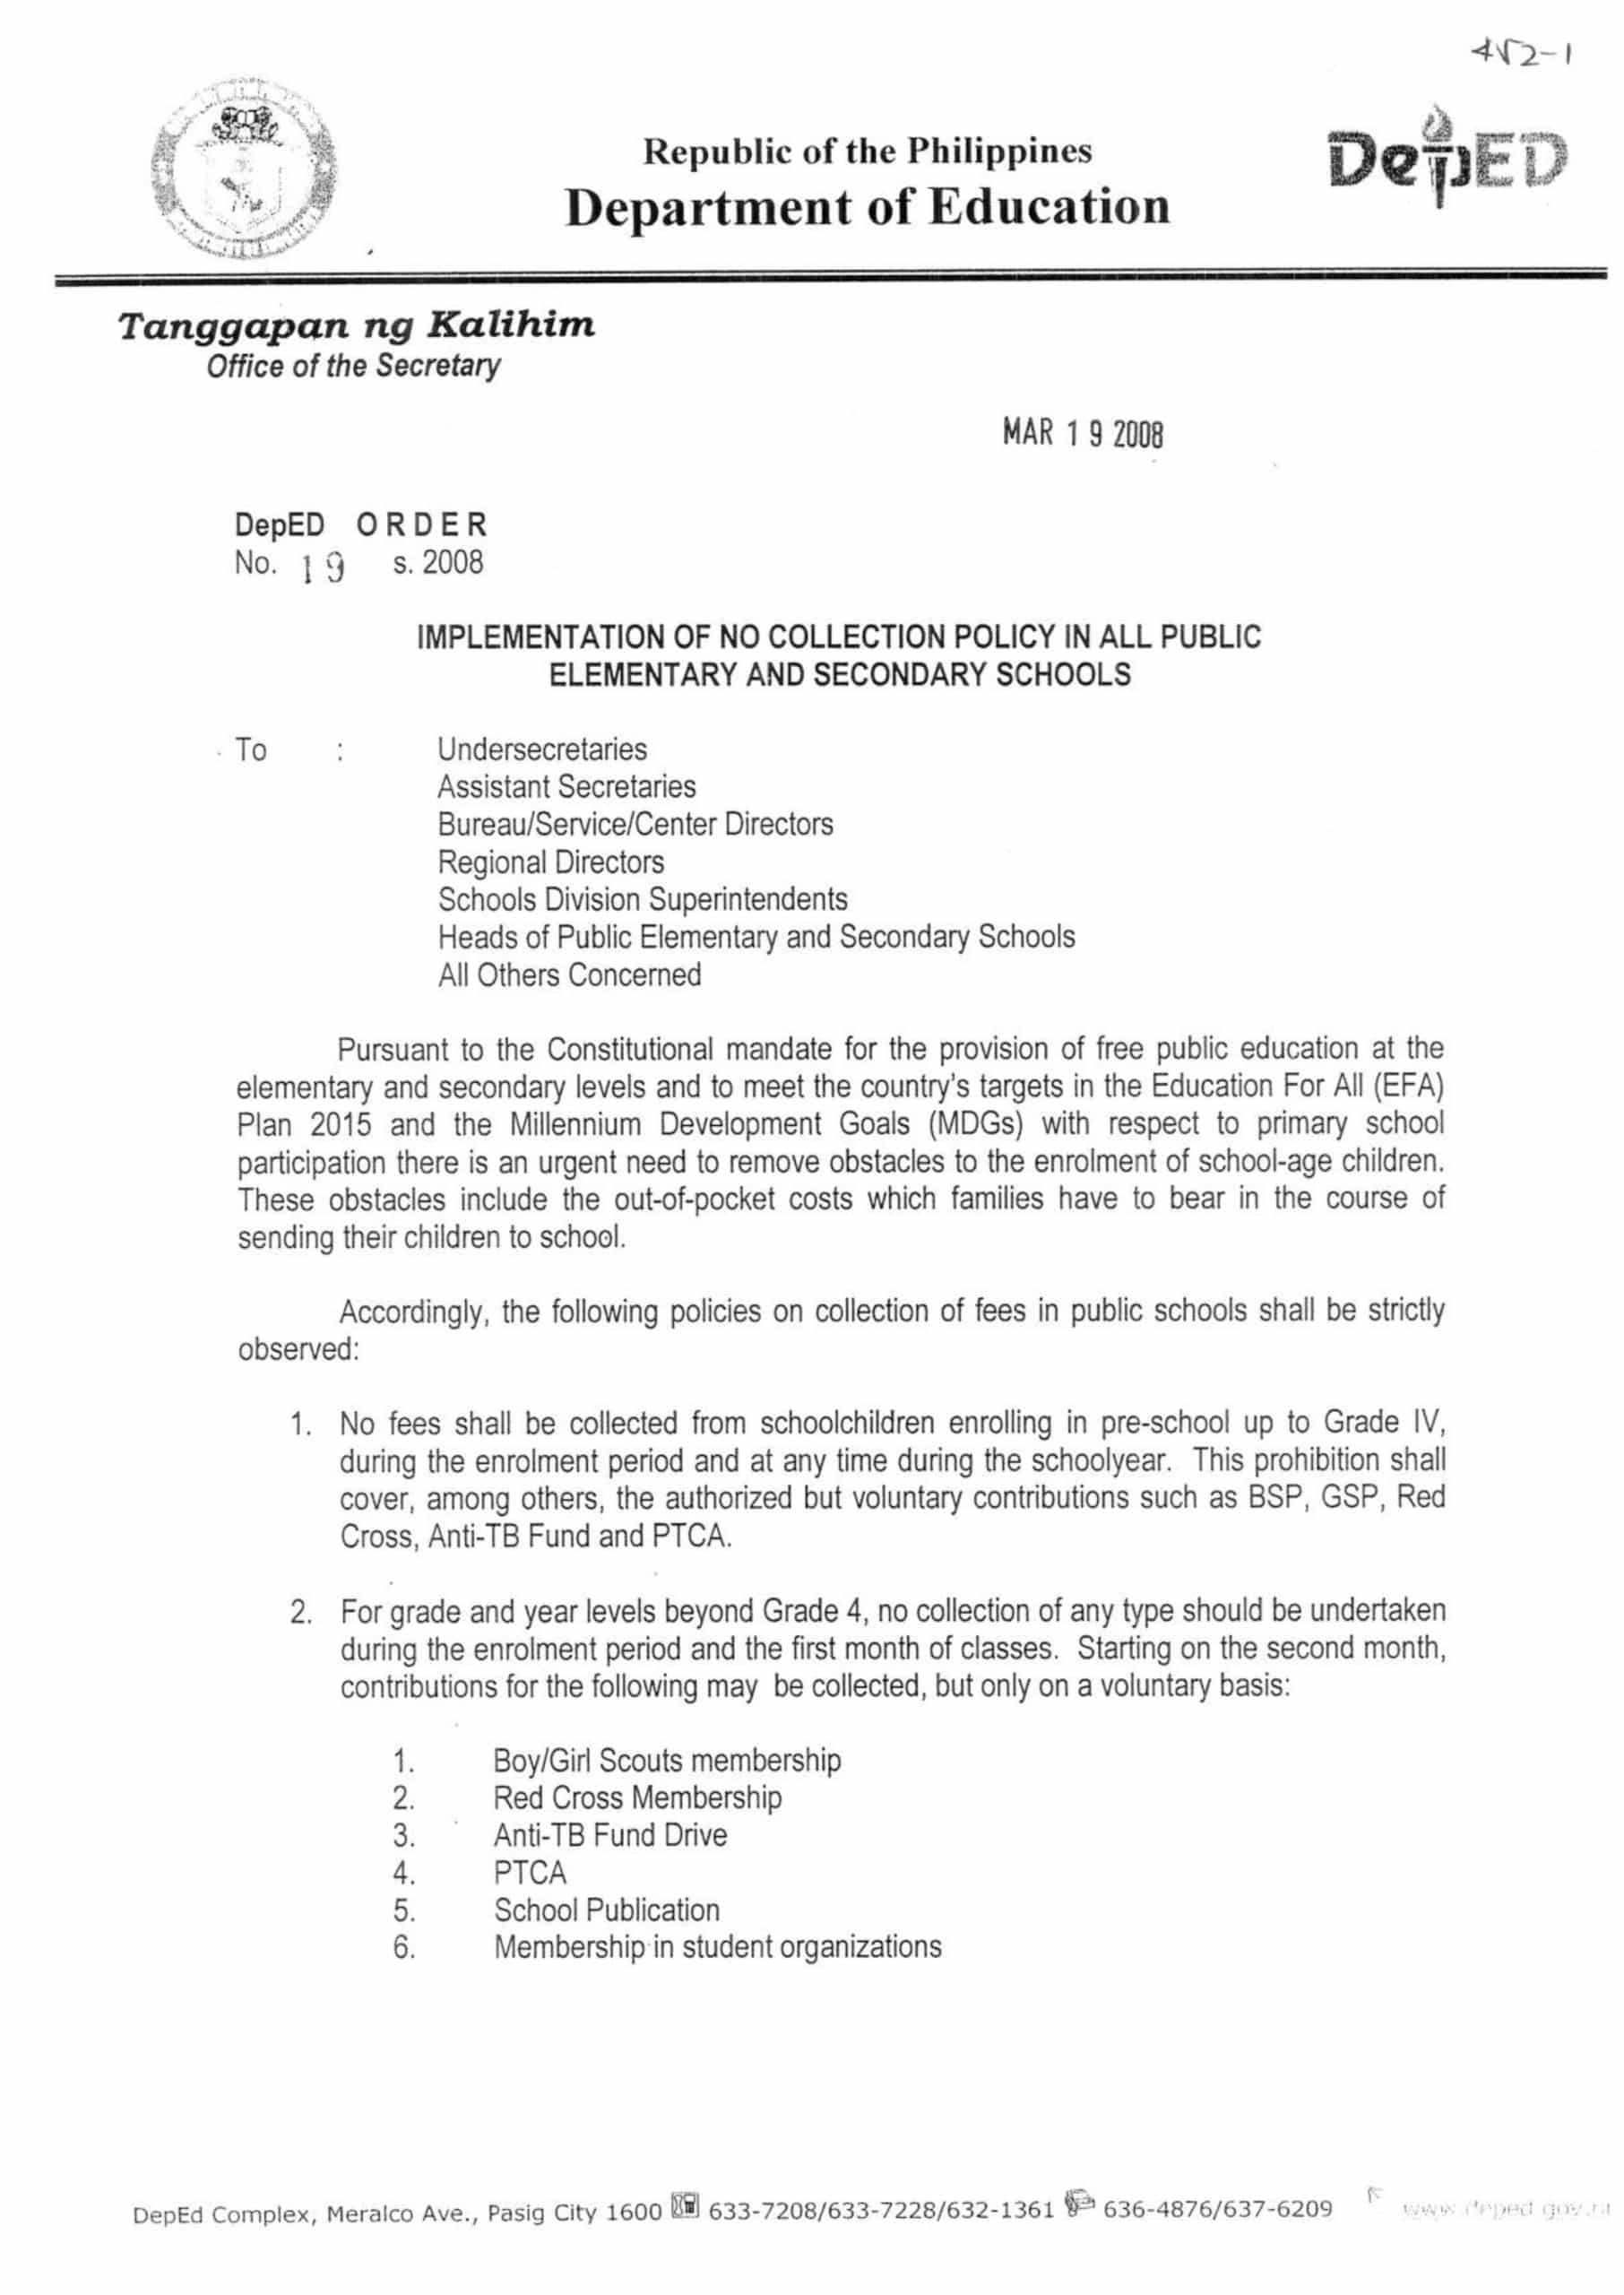 deped order about no homework policy